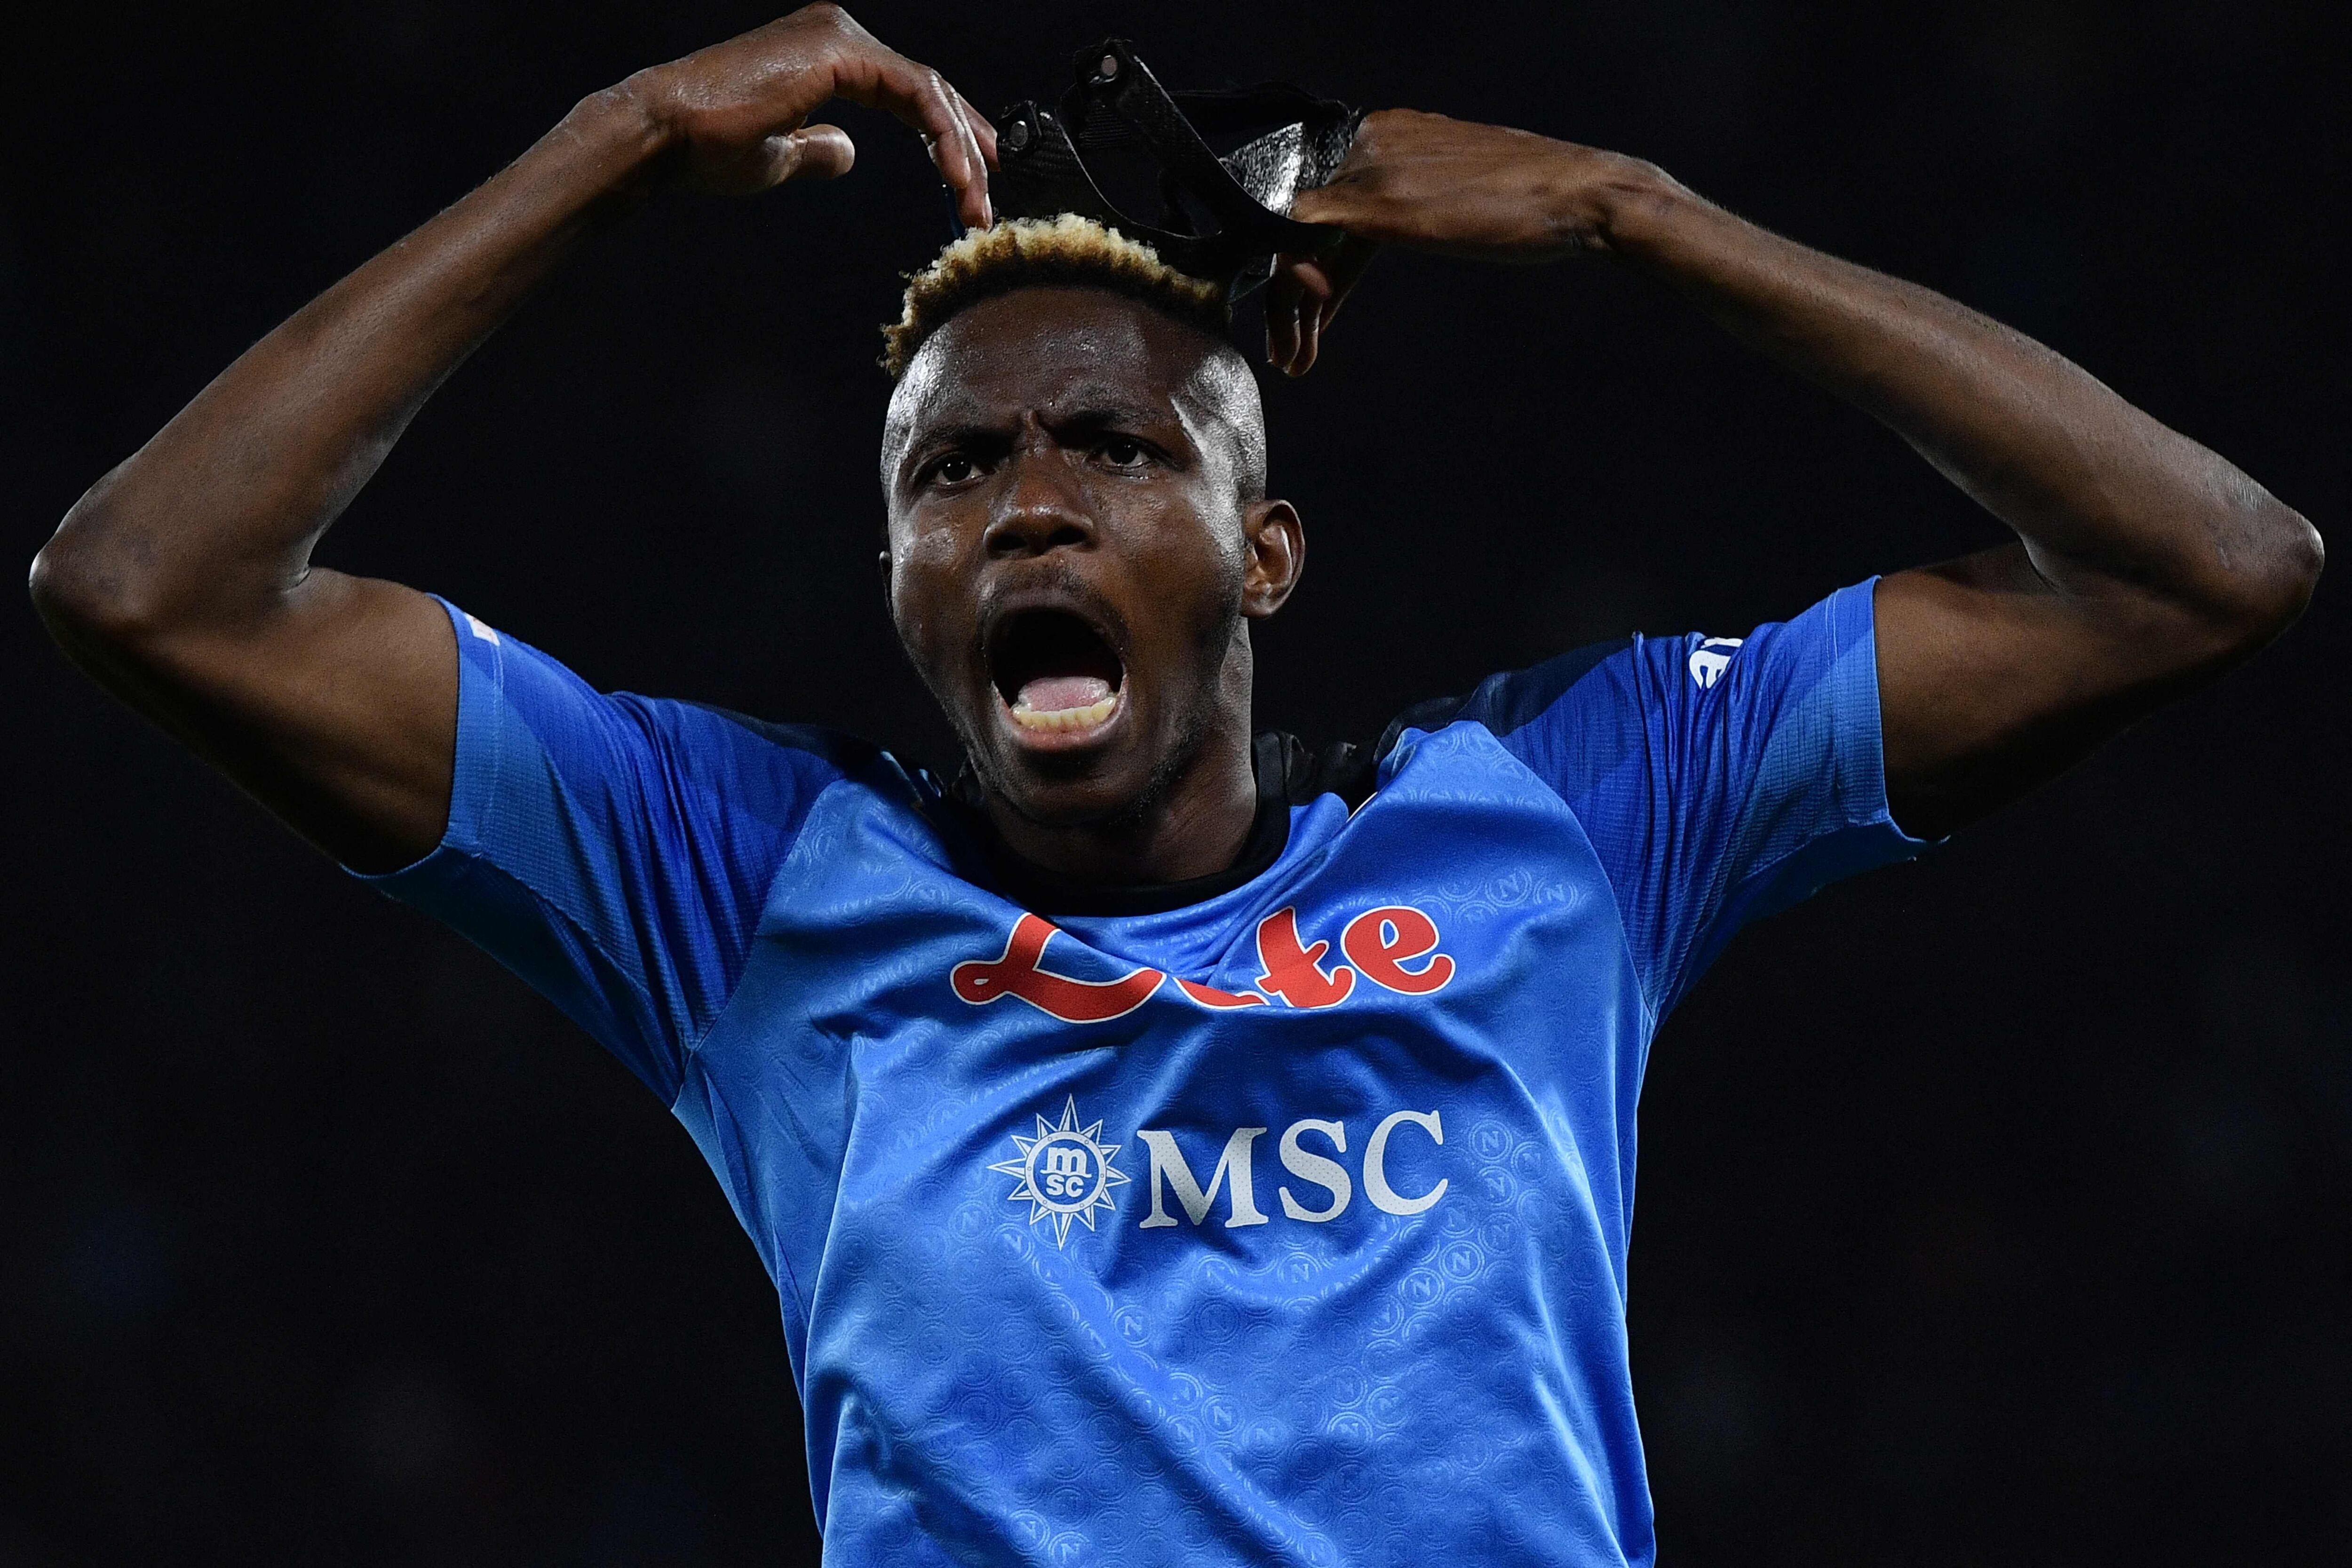 Napoli's Nigerian forward Victor Osimhen celebrates after Napoli opened the scoring during the Italian Serie A football match between Napoli and Atalanta on March 11, 2023 at the Diego-Maradona stadium in Naples. (Photo by Filippo MONTEFORTE / AFP)